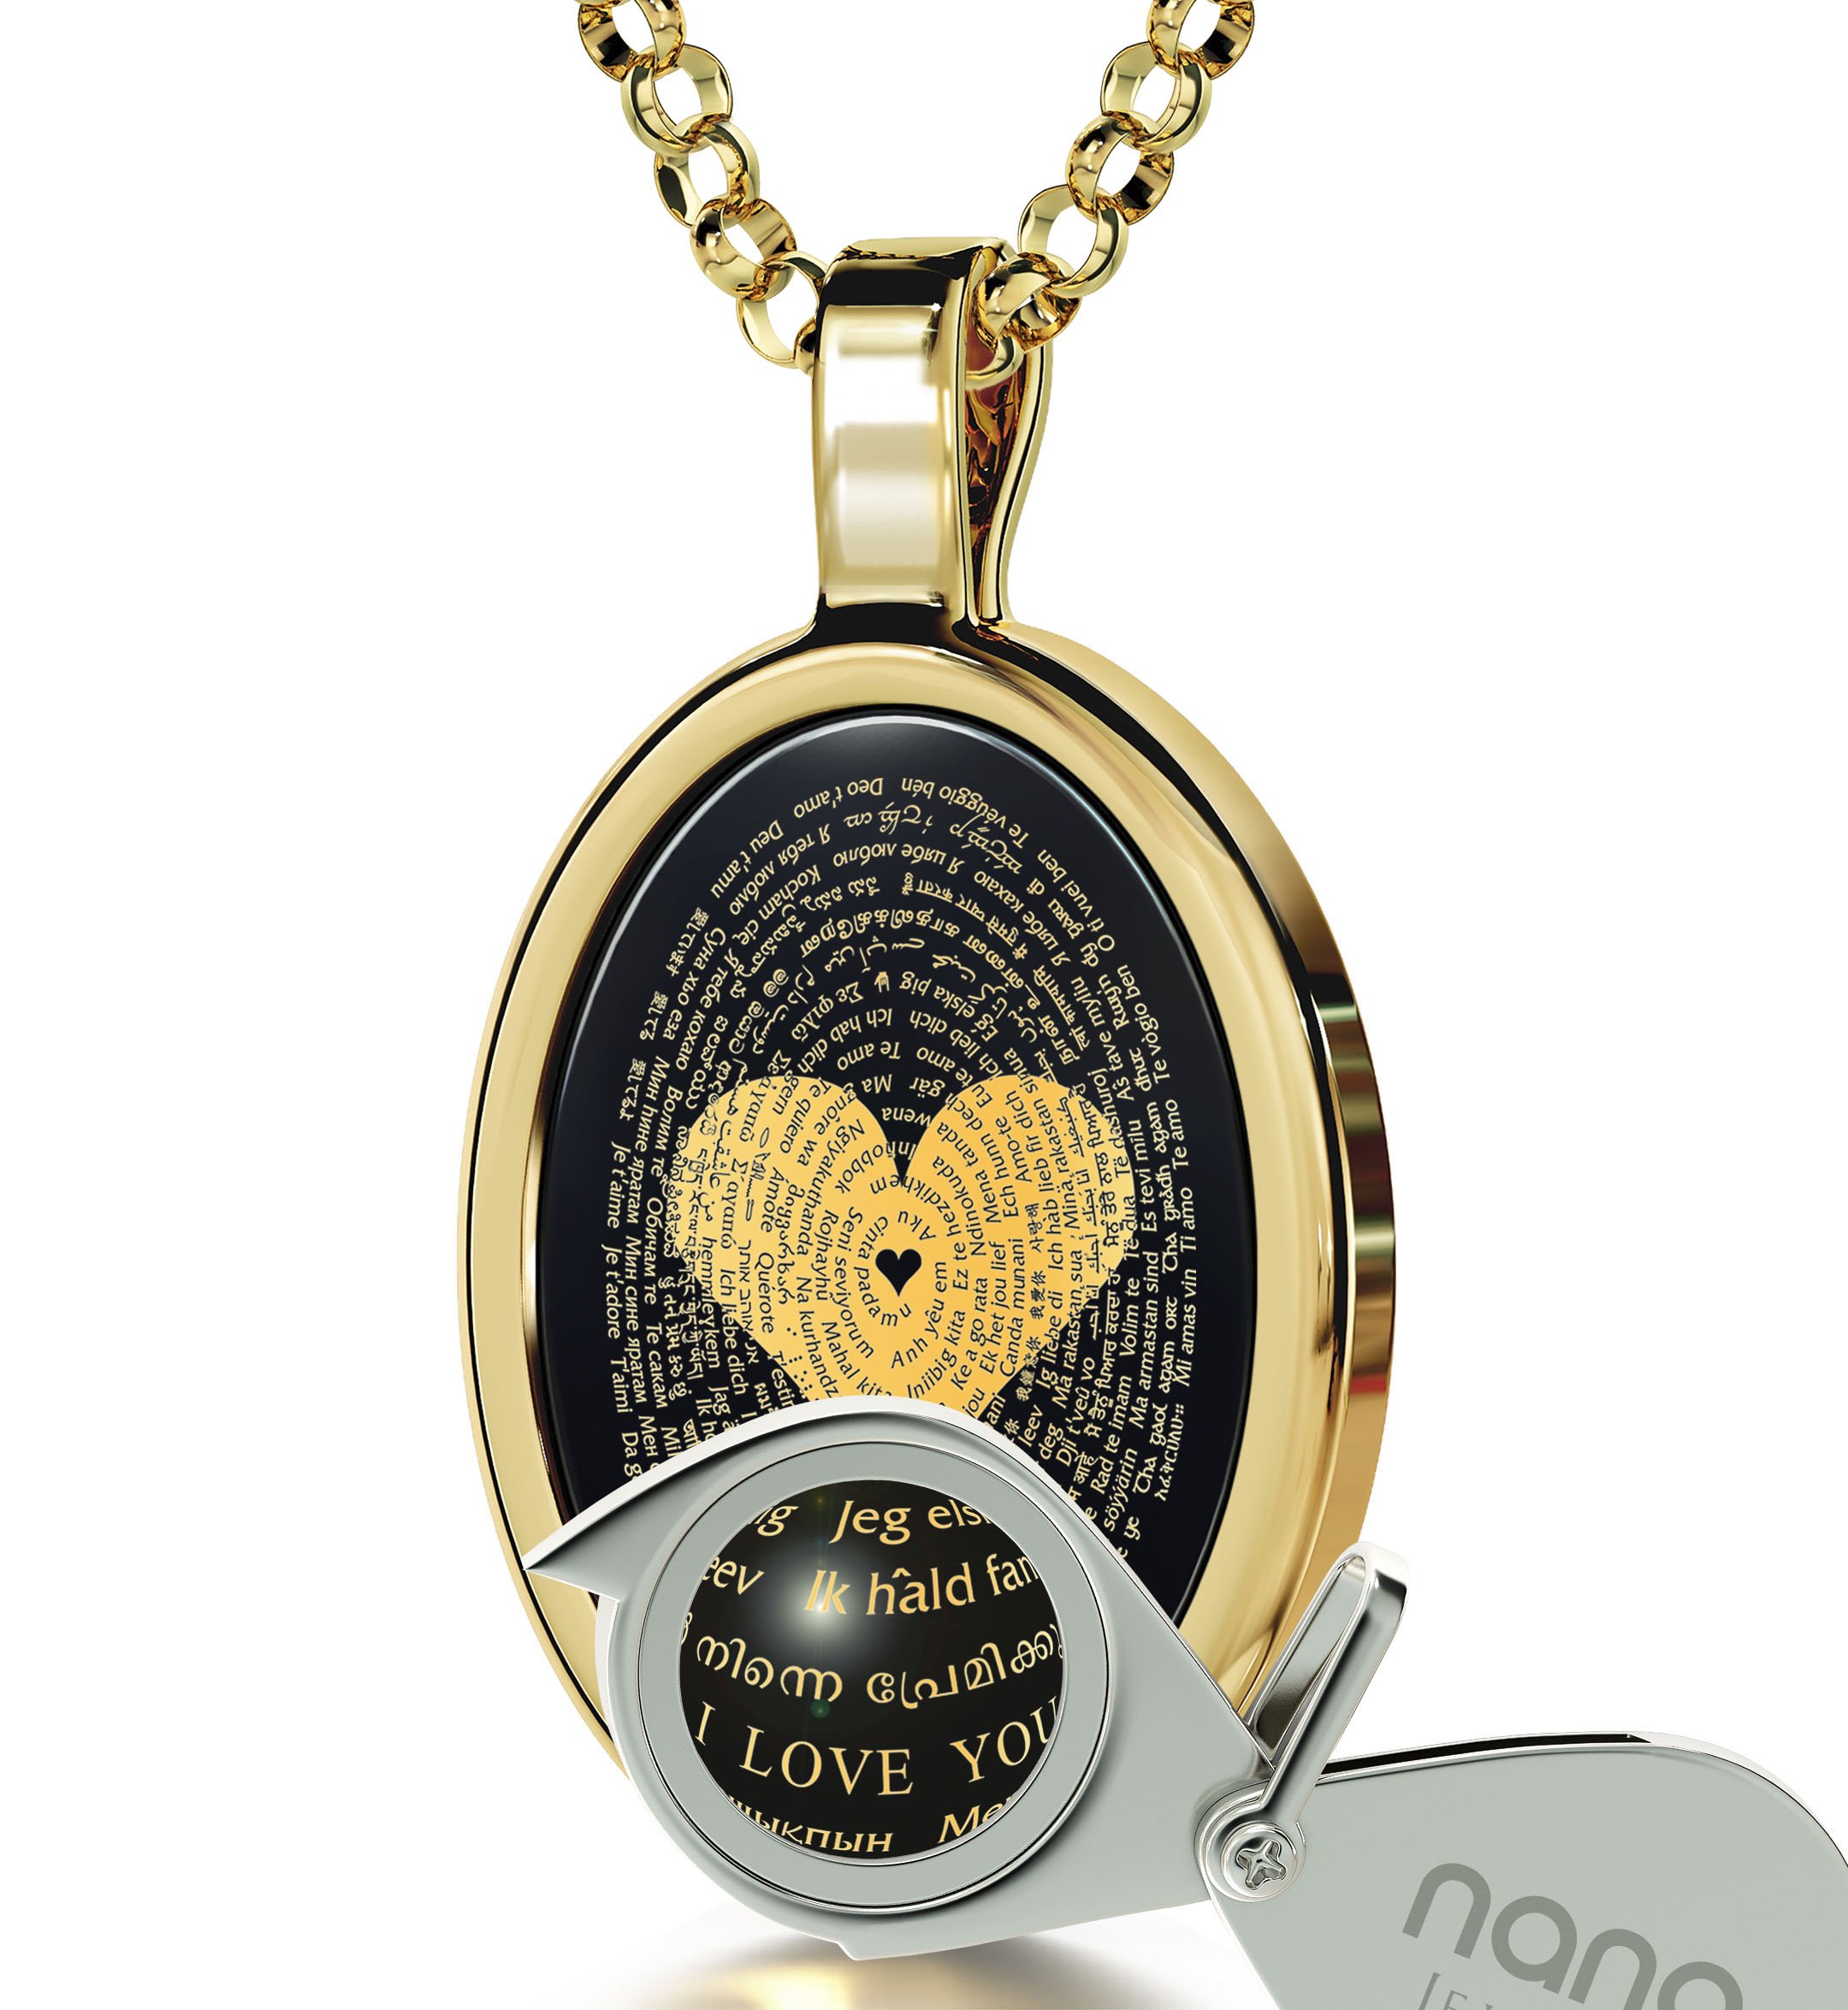 NanoStyle Love Jewelry Set I Love You Necklace in 120 Languages Pure Gold Inscribed in Miniature Text on Onyx Birthday Gift Pendant and Black Crystal Heart Dangle Earrings for Women, 18